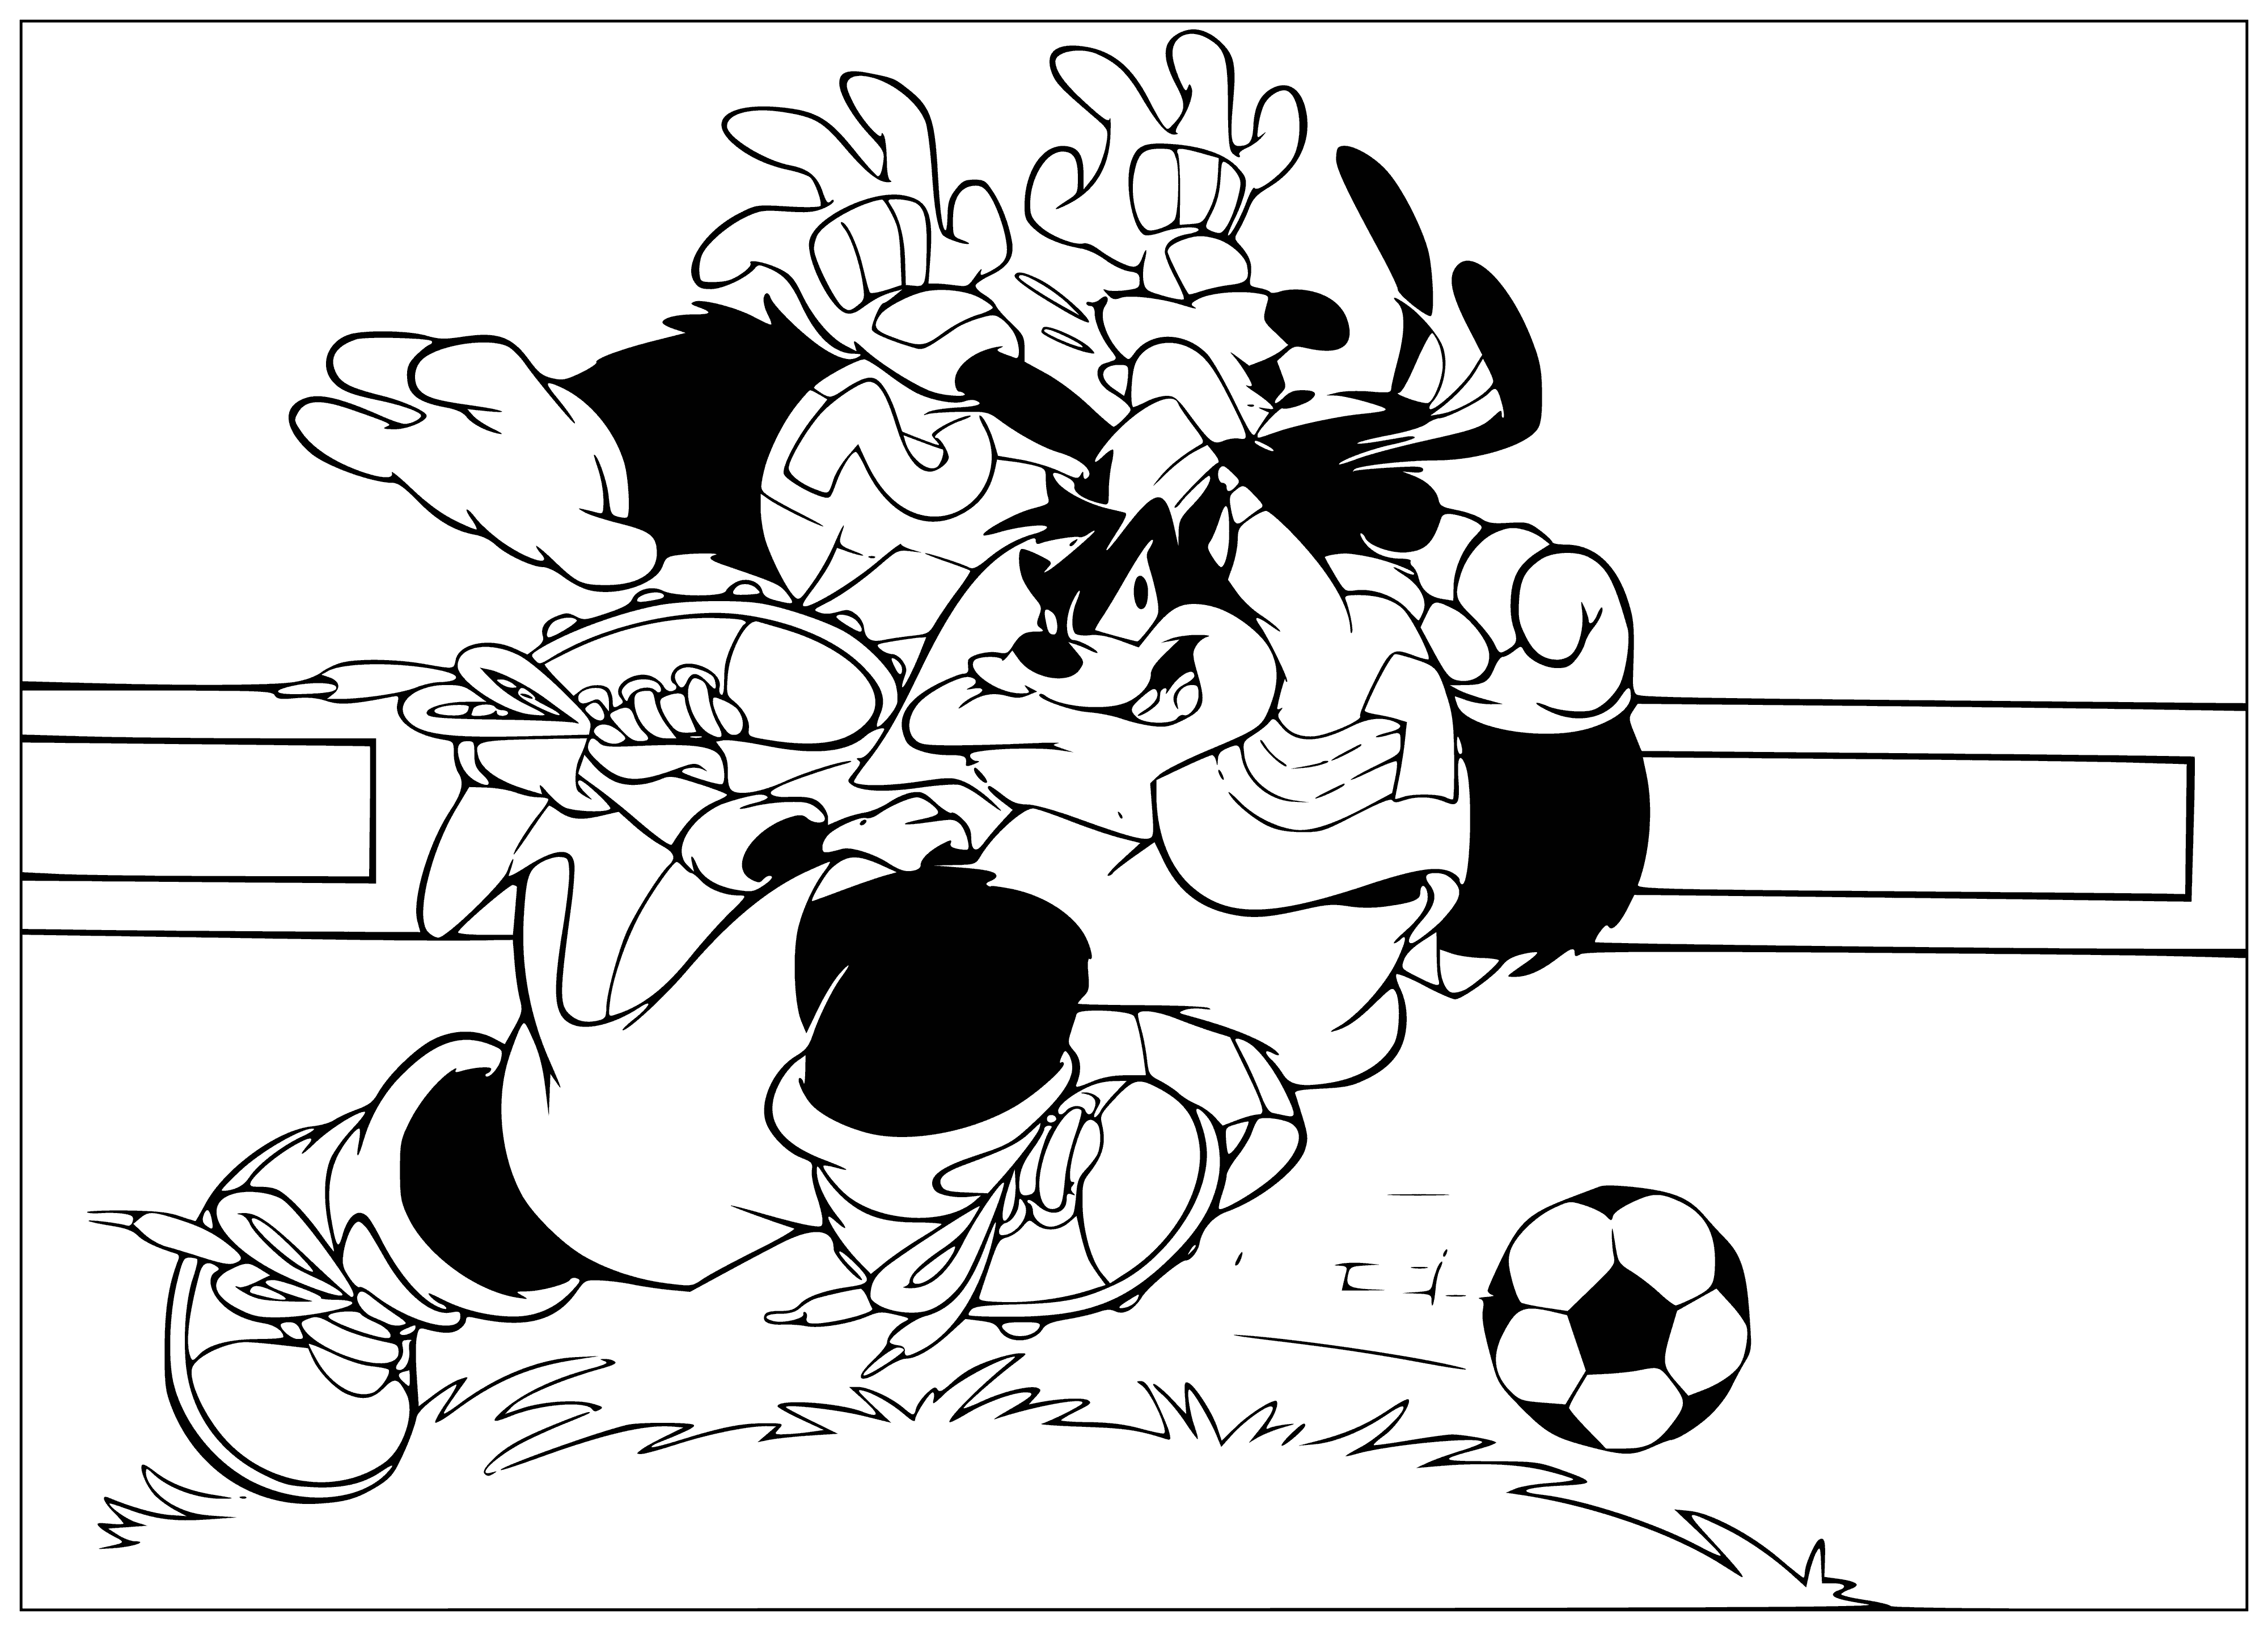 Football coloring page